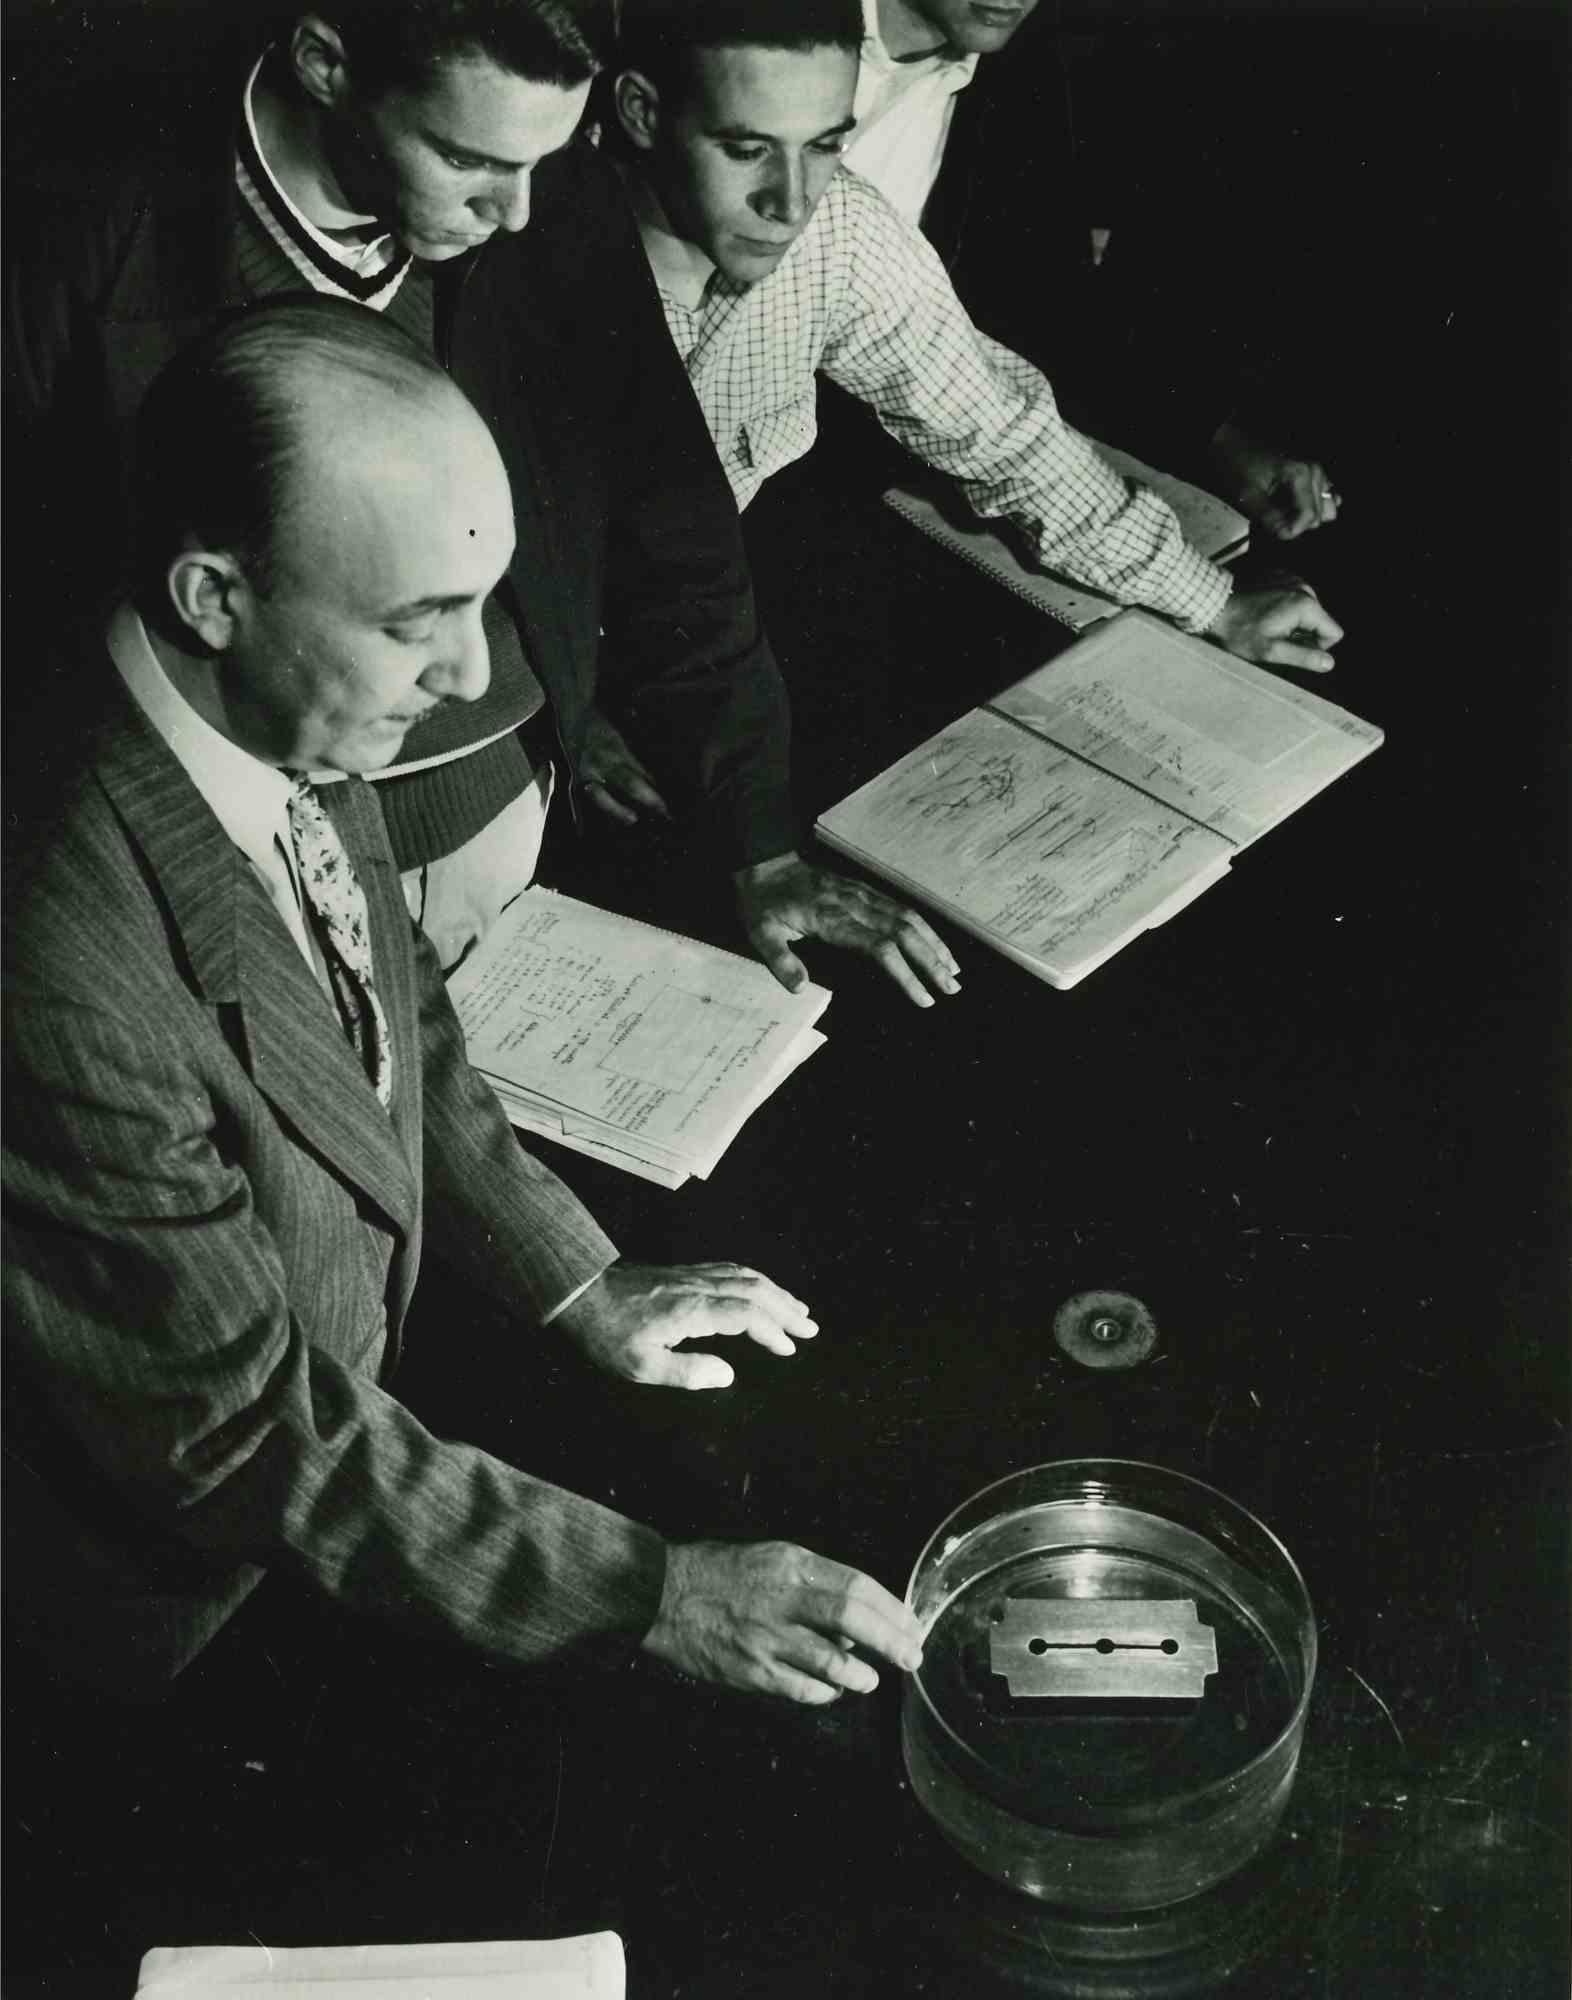 Unknown Figurative Photograph - Demonstration of Physics - Vintage Photograph - Mid 20th Century